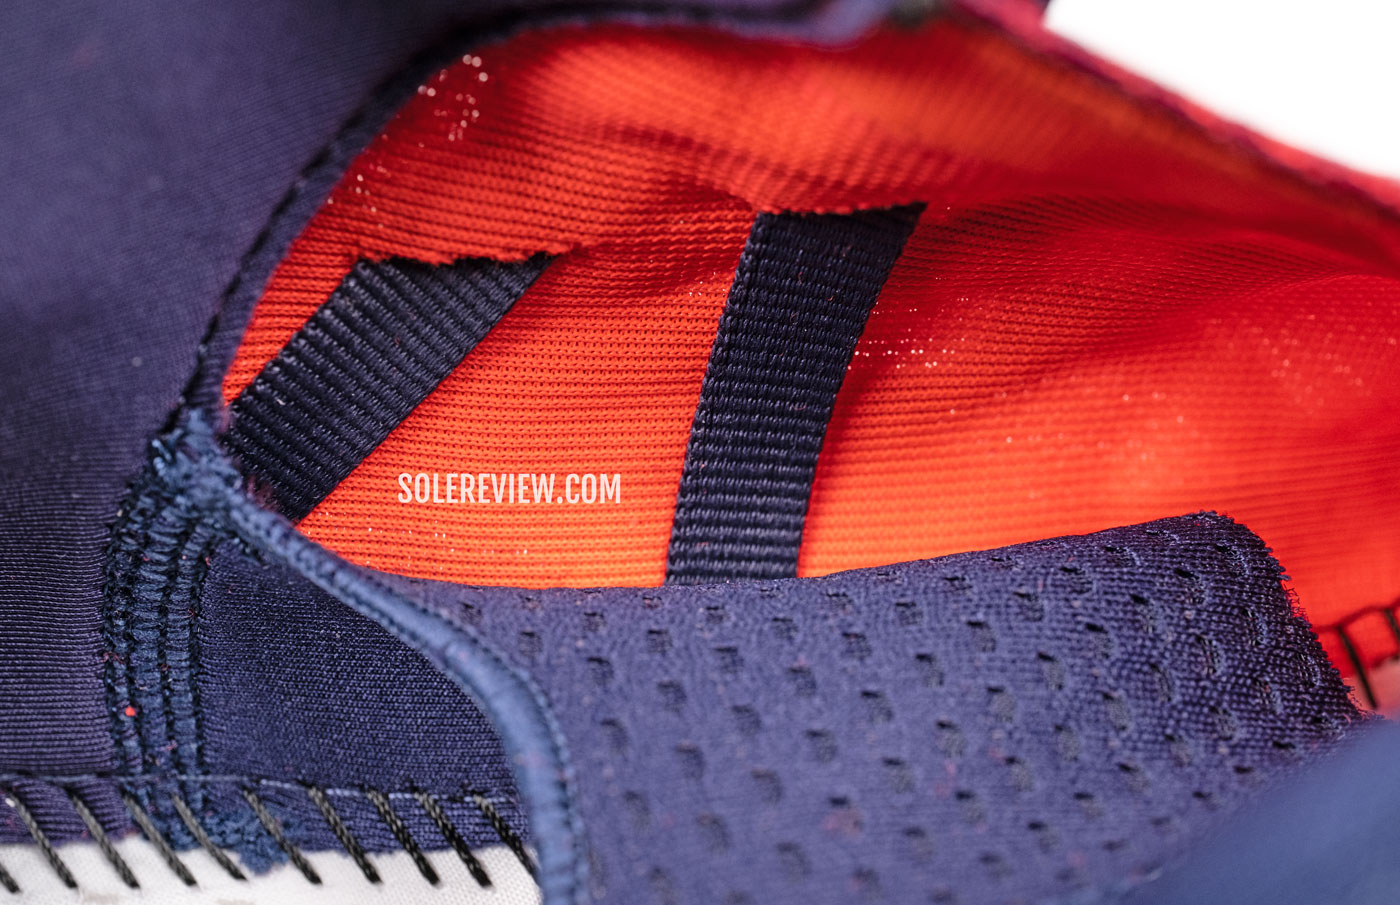 The inner sleeve and strap of the Saucony Triumph 20.